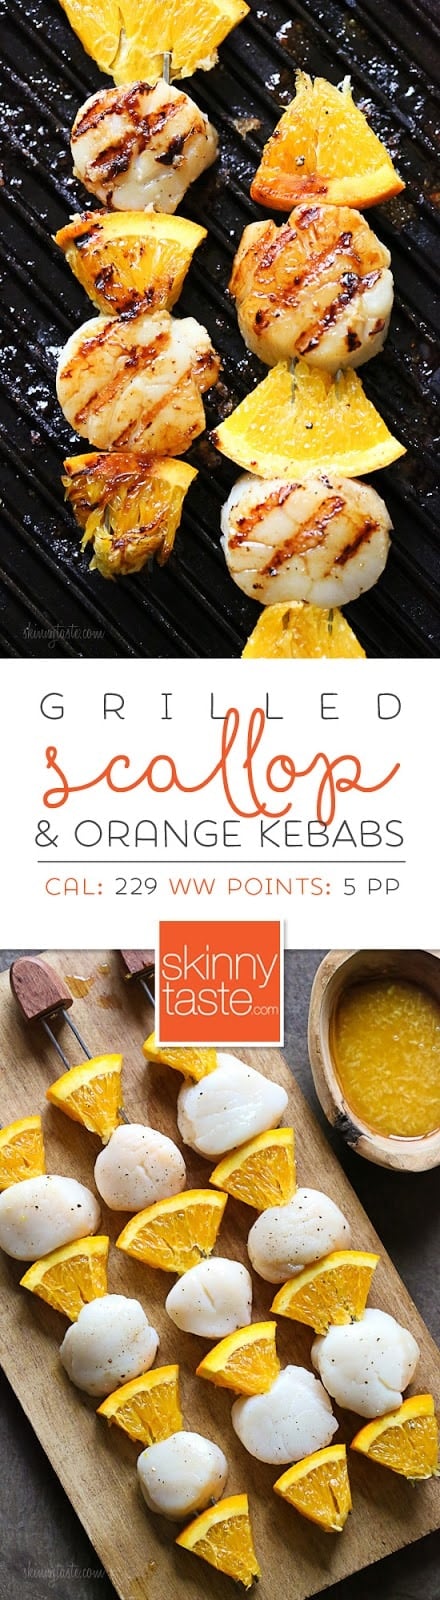 Grilled Scallop and Orange Kebabs with Honey-Ginger Glaze – 5 ingredients, ready in 15 minutes!